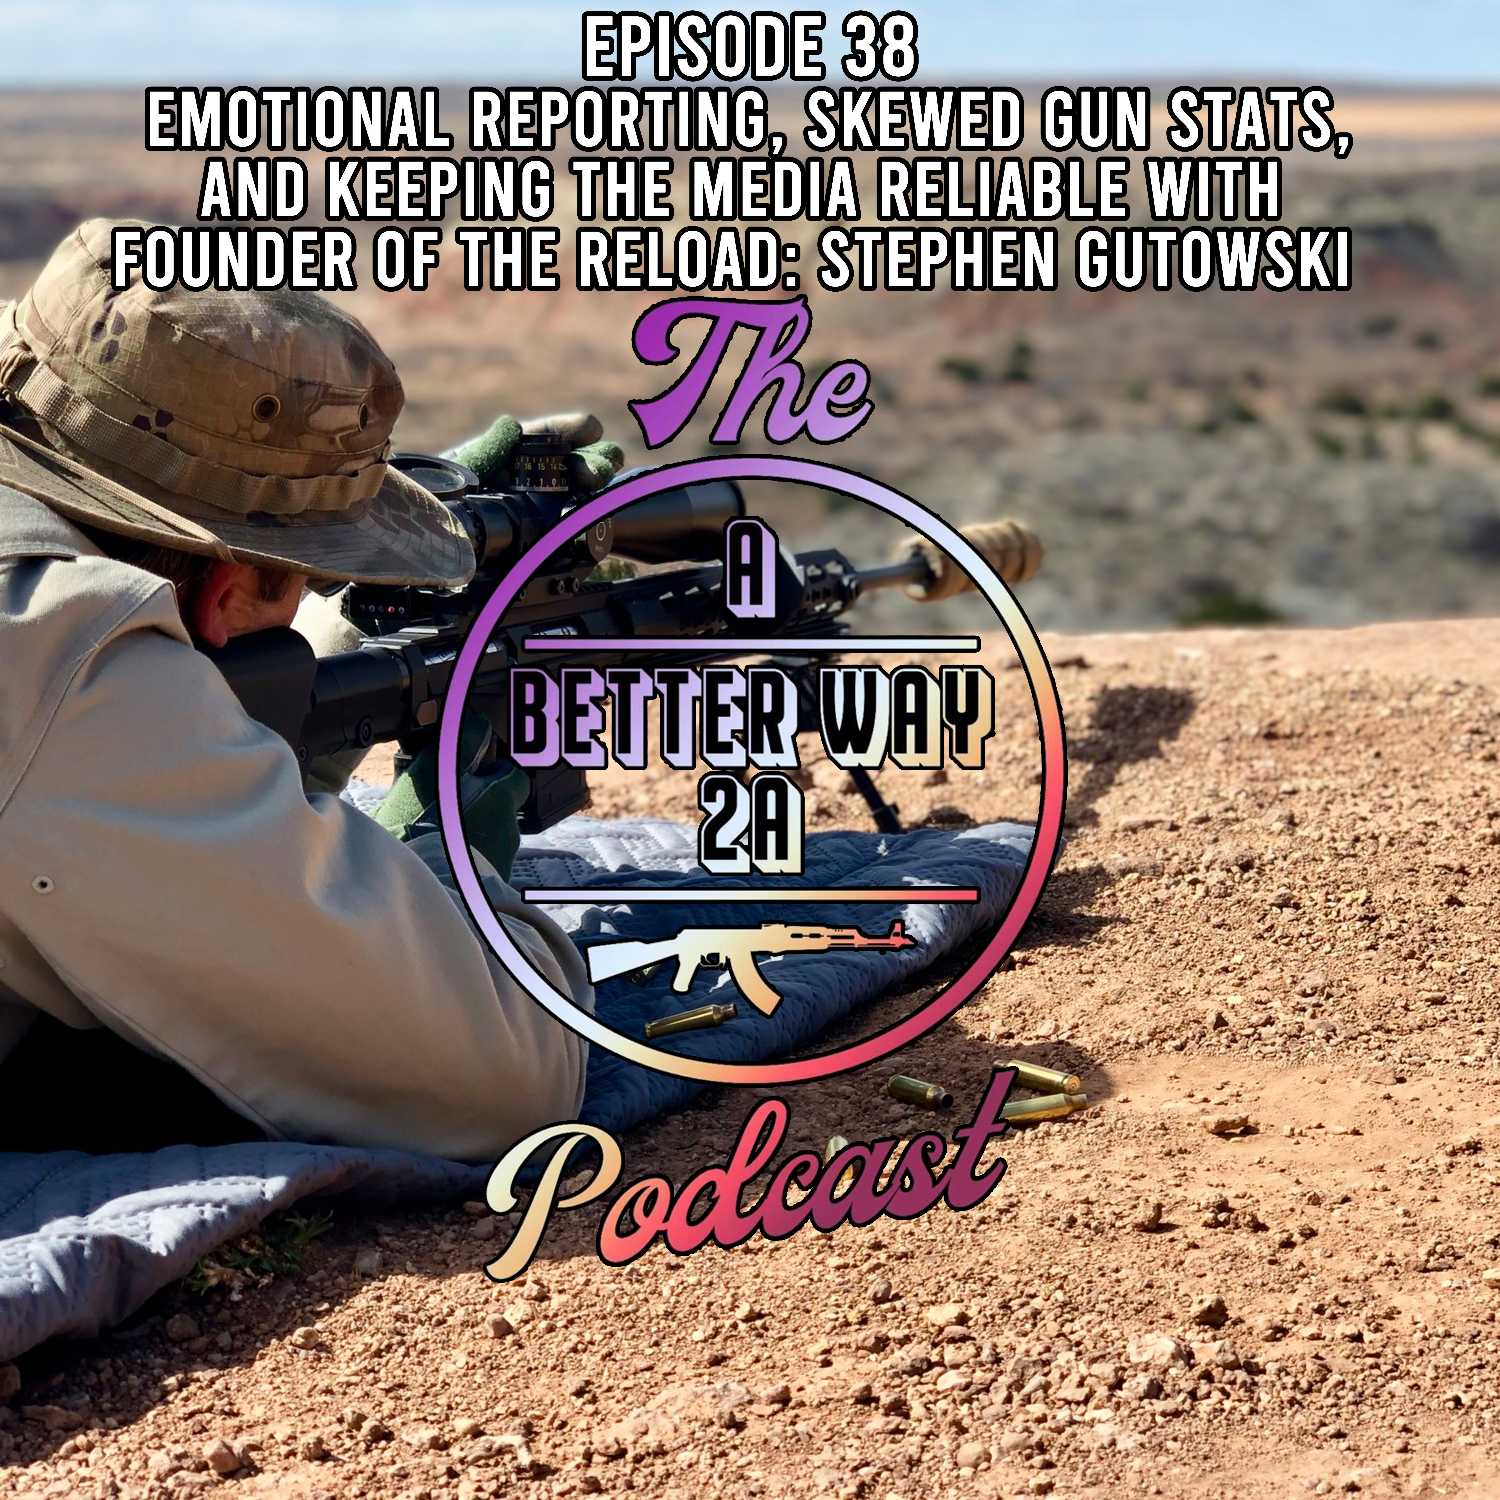 Episode 38 - Emotional Reporting, Skewed Gun Stats, And Keeping The Media Reliable With Founder Of The Reload: Stephen Gutowski